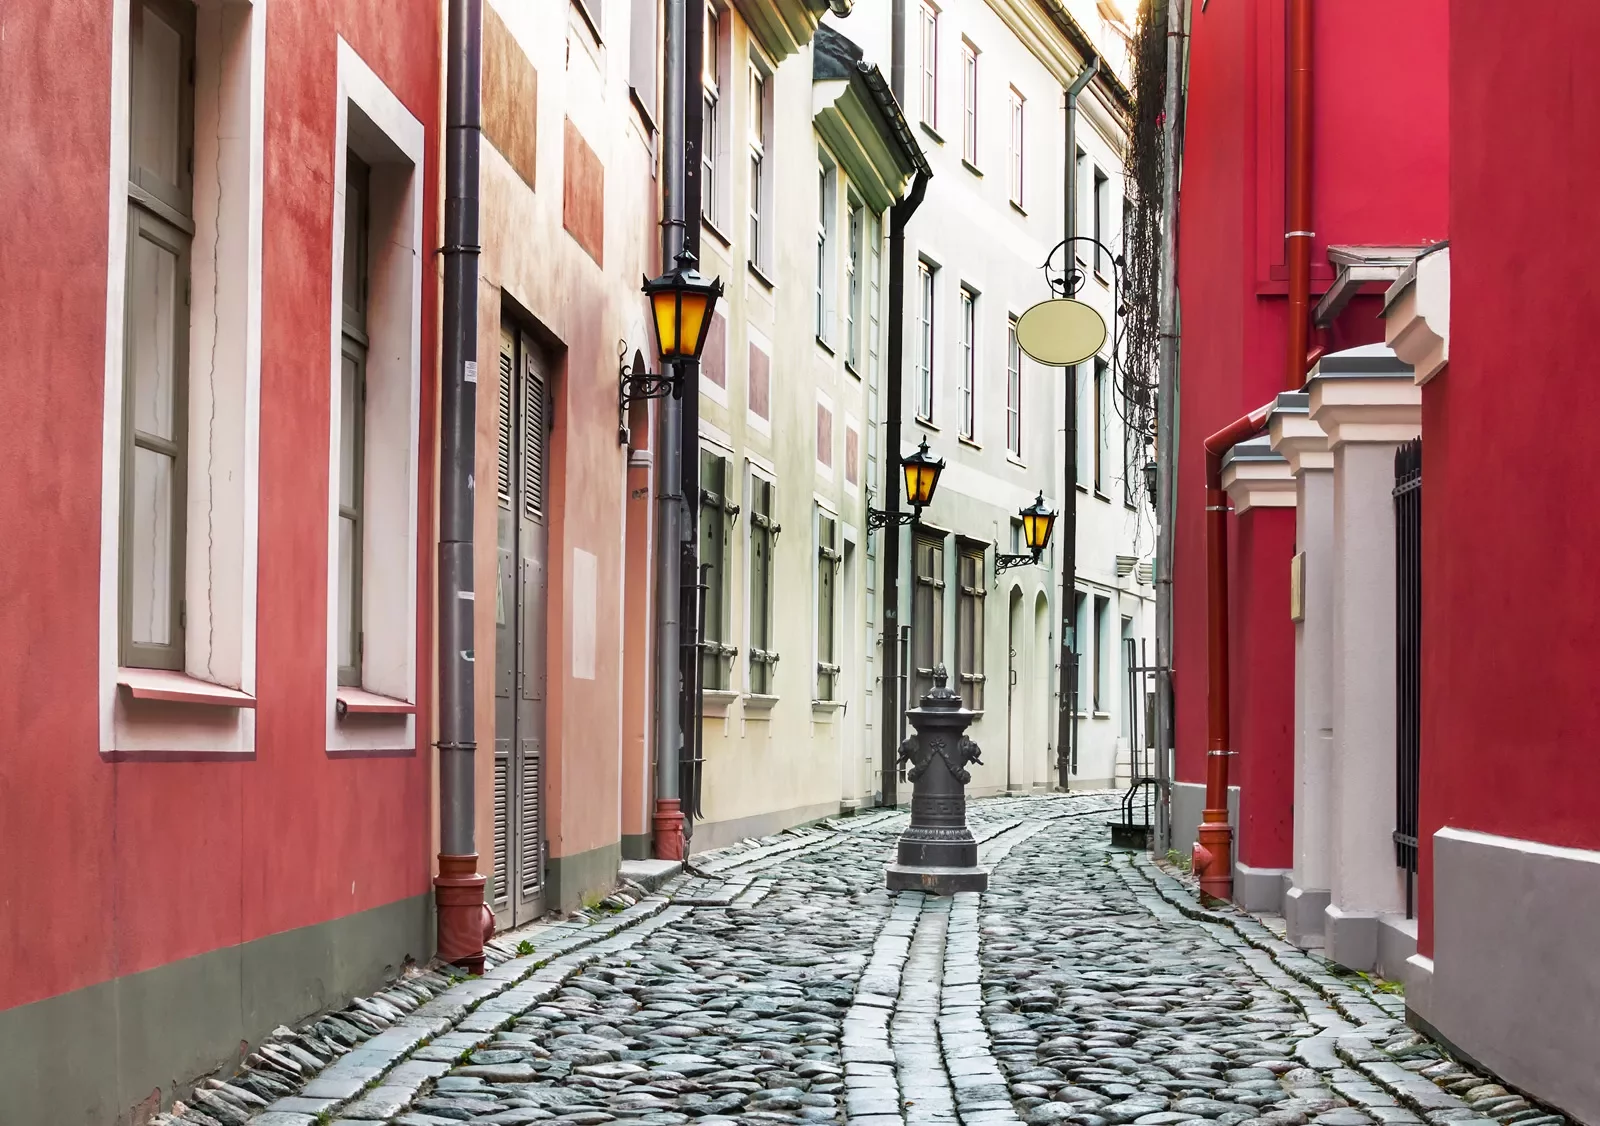 Cobblestone street surrounded by red buildings